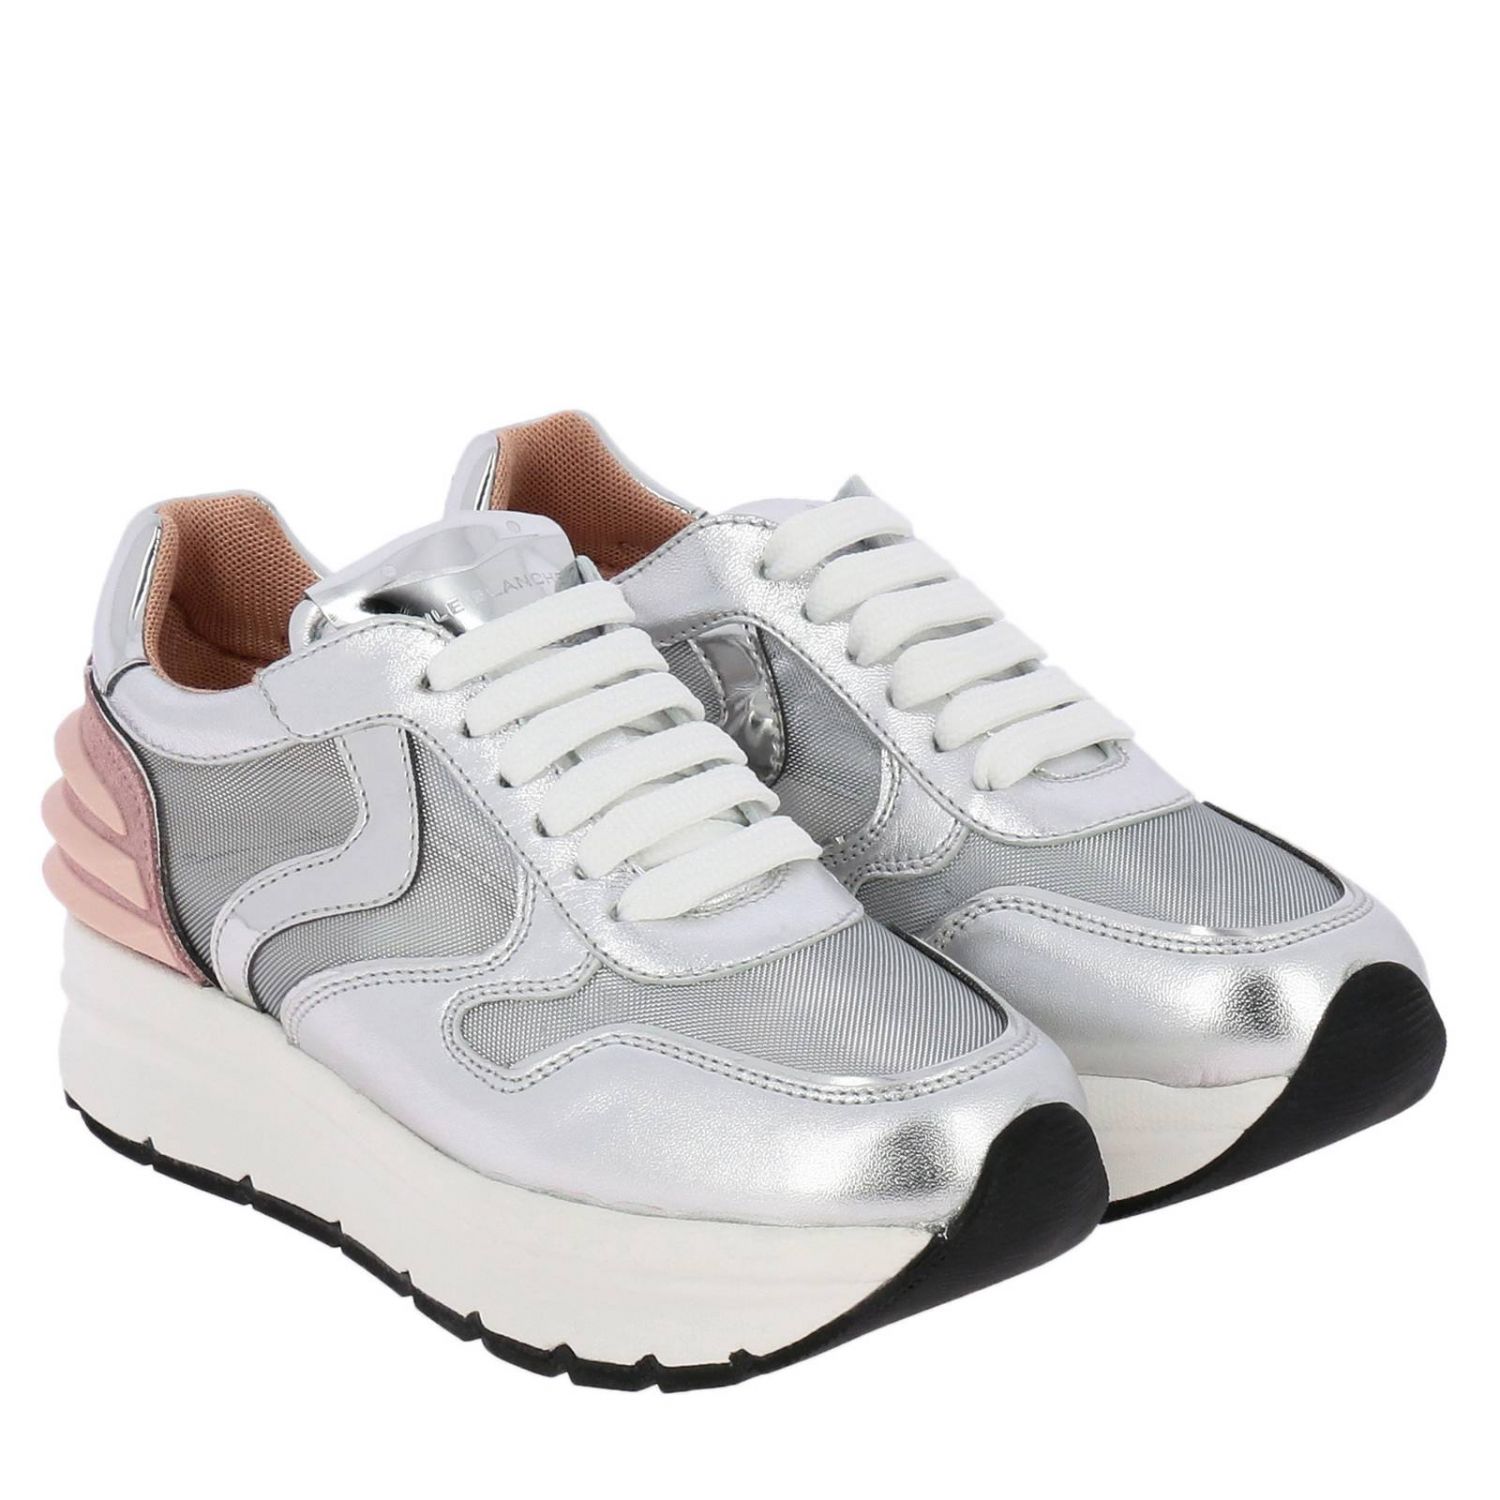 Voile Blanche Outlet: Sneakers women - Silver | Sneakers Voile Blanche ...